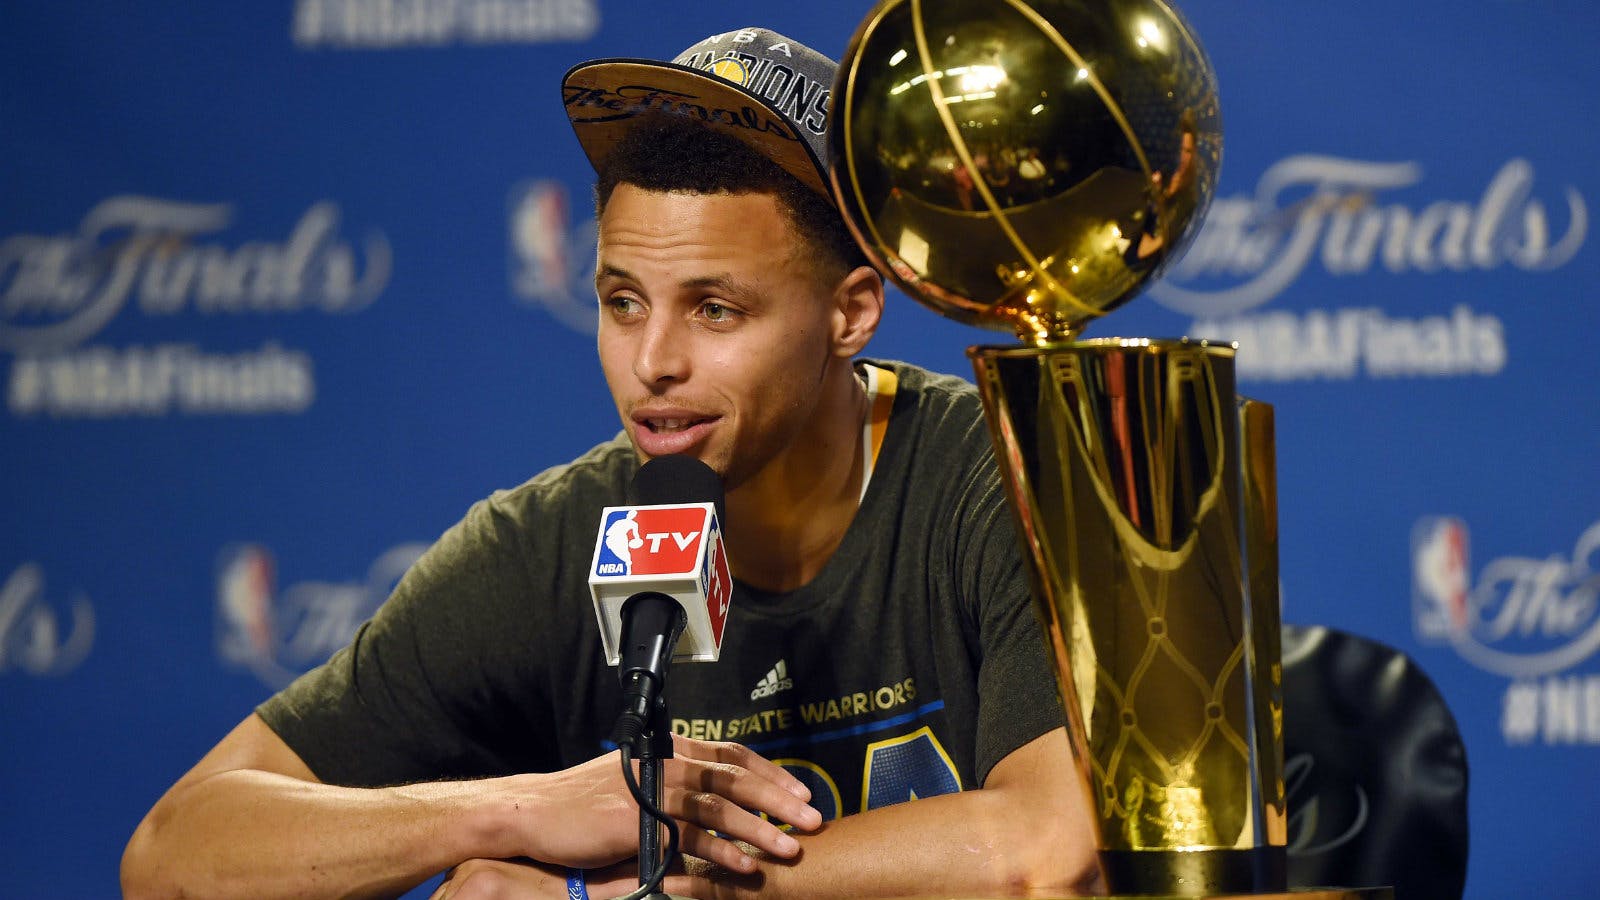 God Is Great': NBA Finals MVP Steph Curry Gives Glory to God After Golden  State Warriors Win Championship